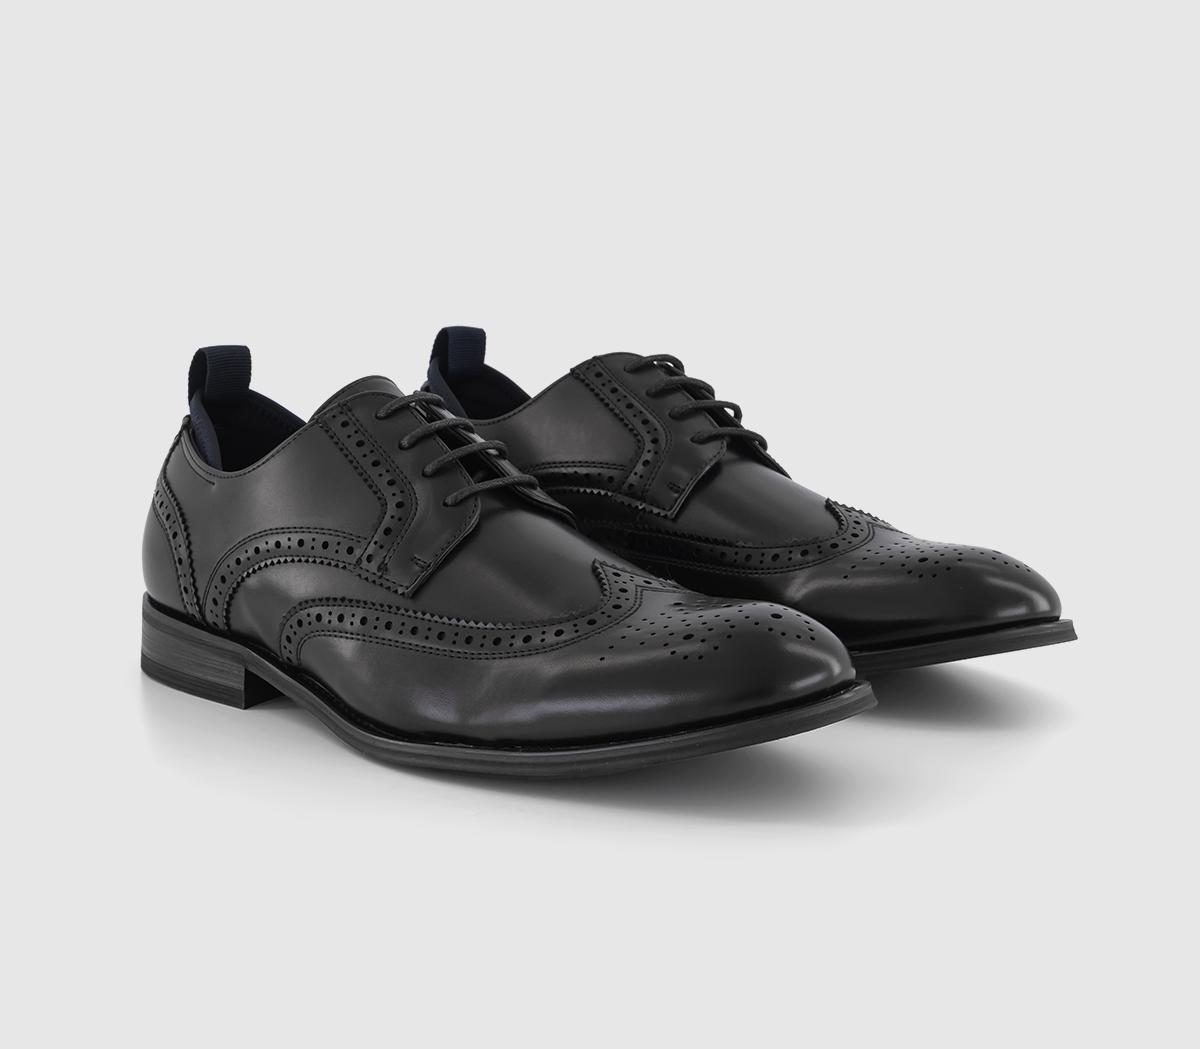 OFFICE Mens Montgomery Brogue Derby Shoes Black, 9